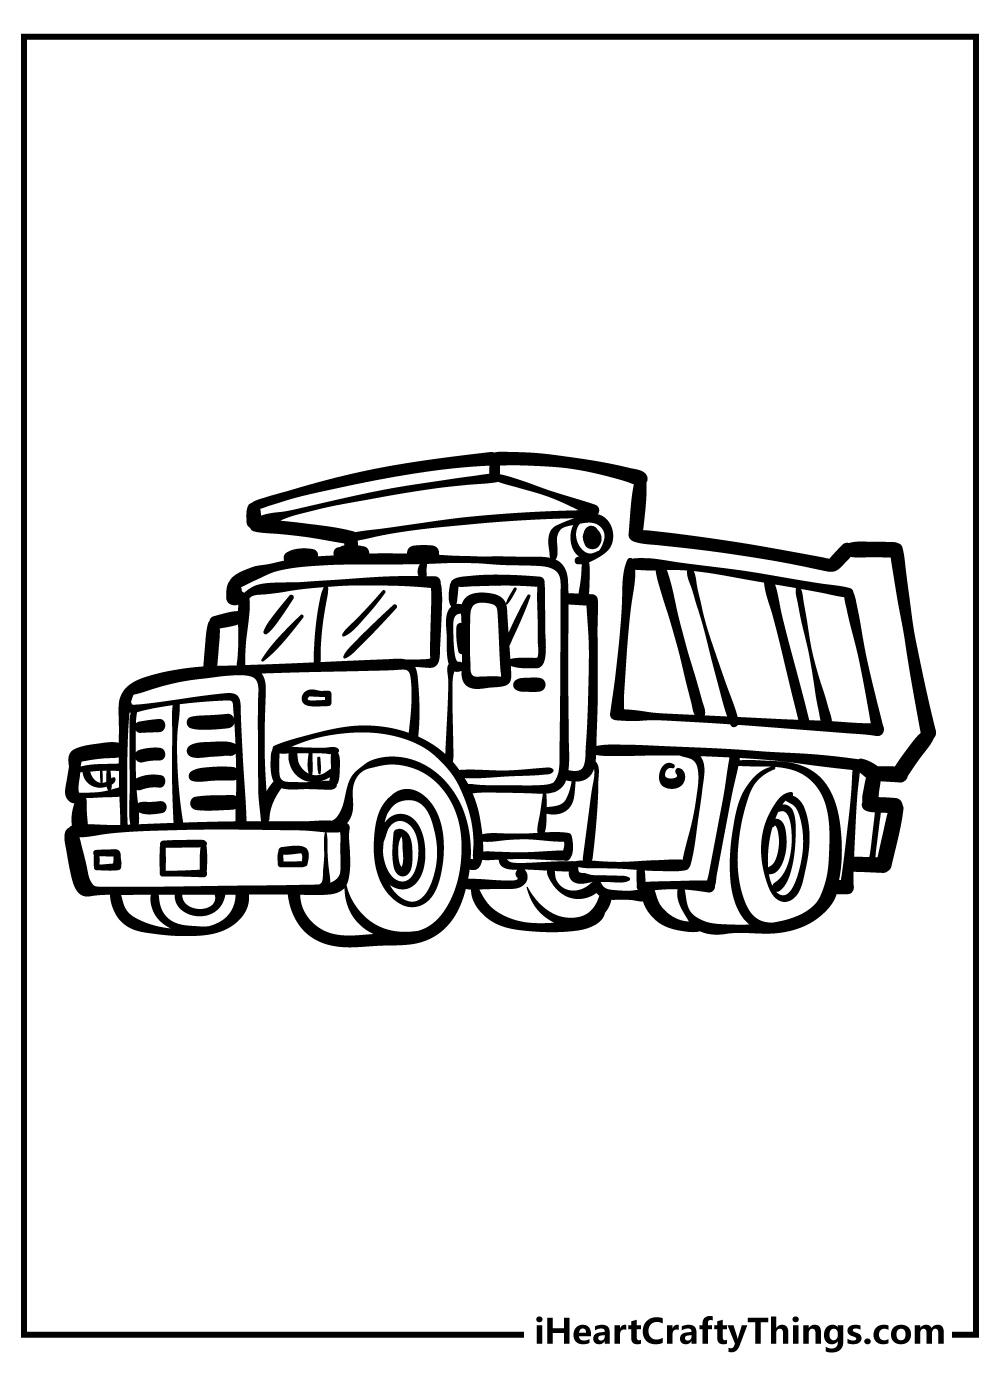 Dump Truck coloring pages free printable